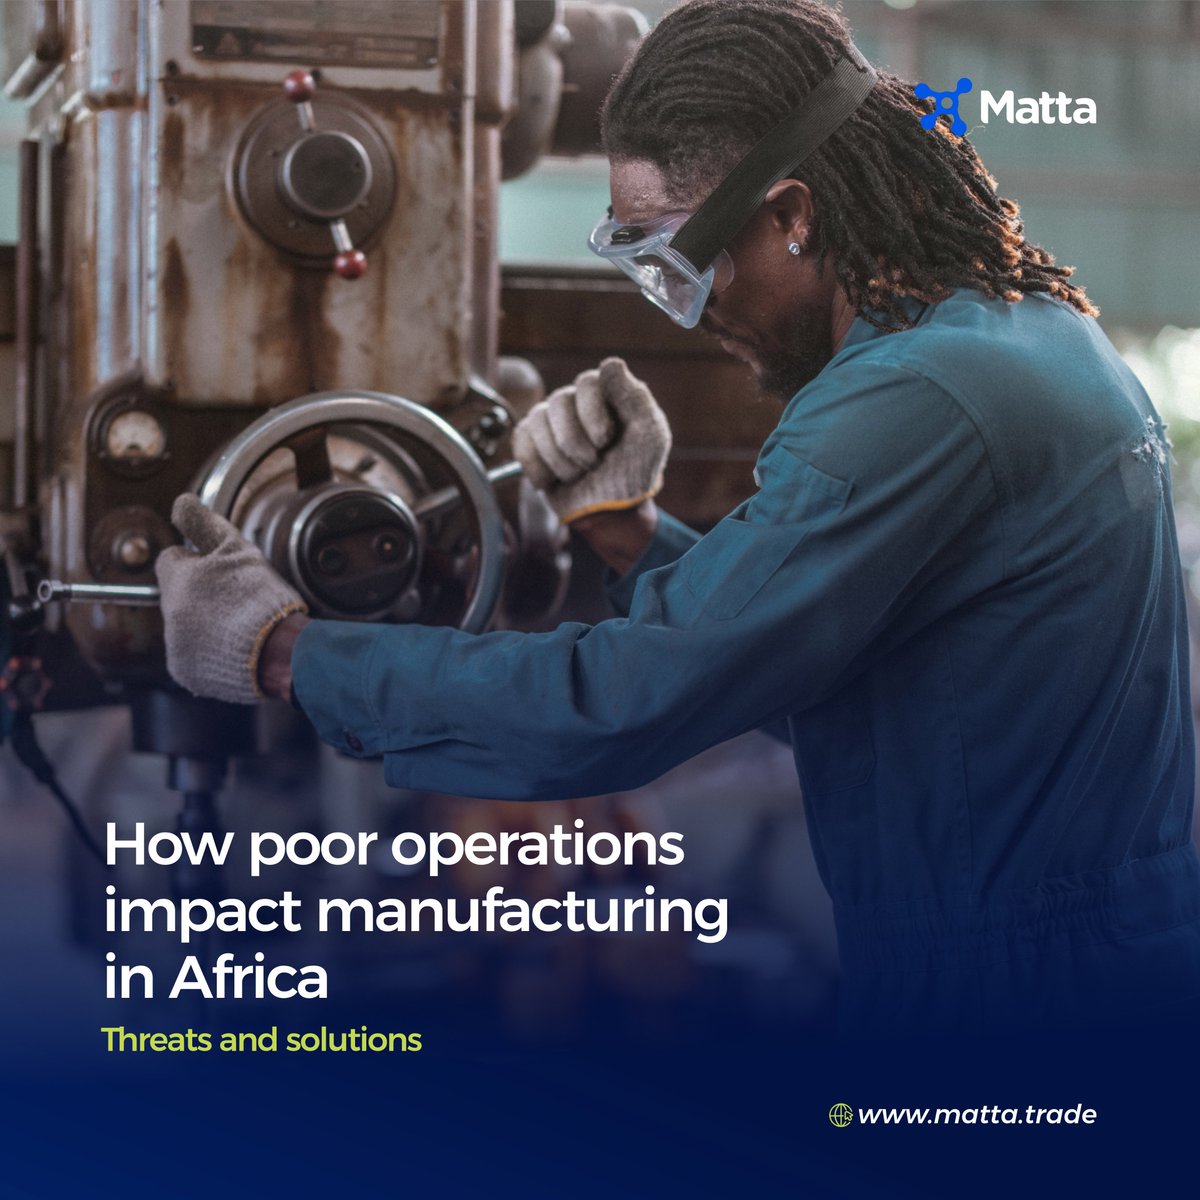 Grow Beyond Chemicals! 
Matta empowers your African manufacturing with more than just supplies. #Matta #ChemicalManufacturing